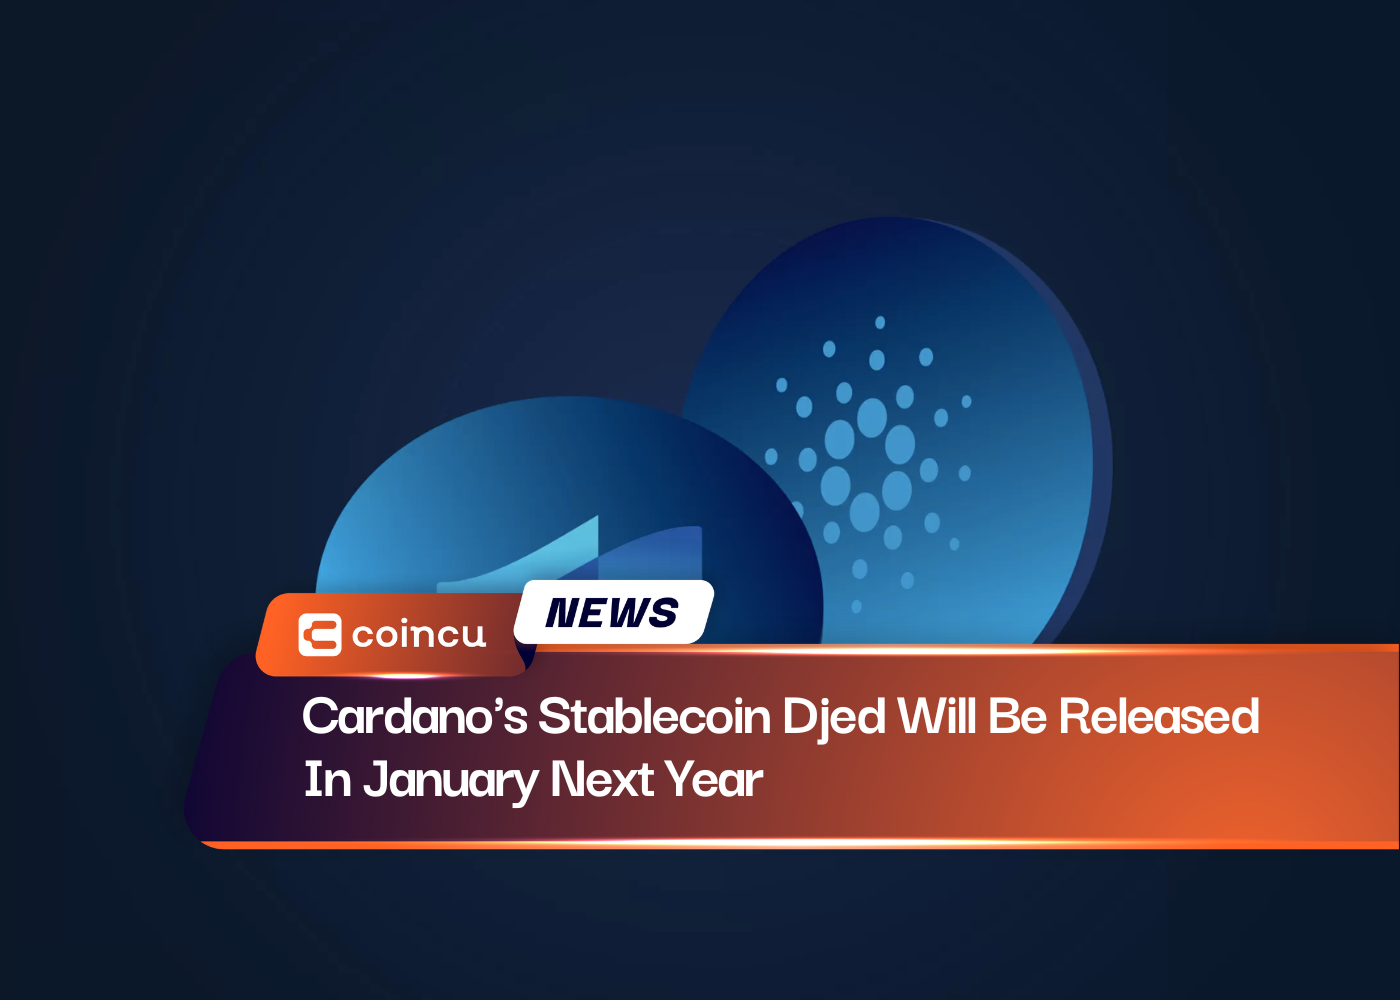 Cardano's Stablecoin Djed Will Be Released In January Next Year